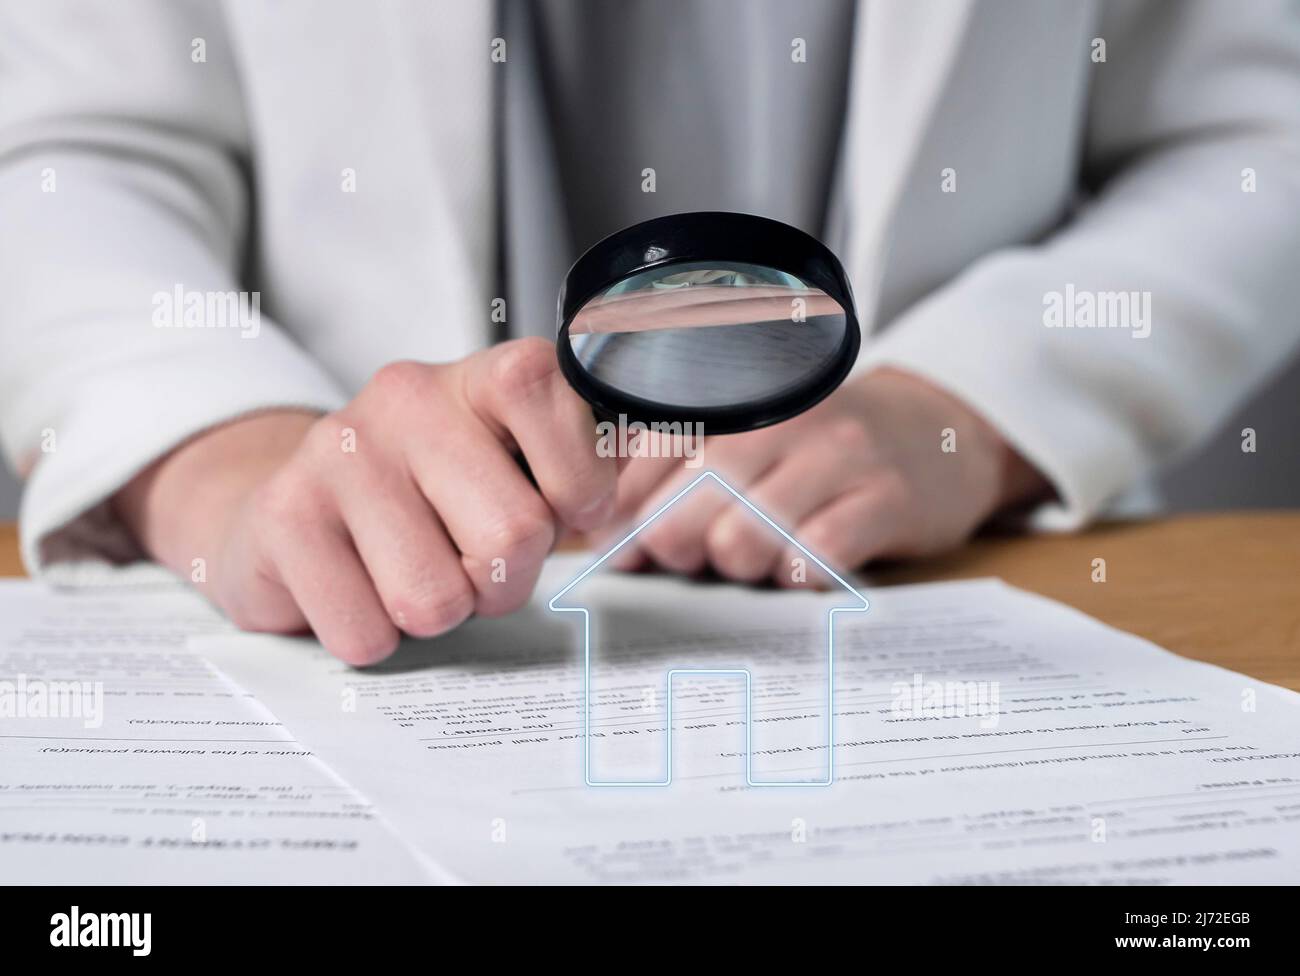 Woman hands holding magnifier and studying real estate purchase, lease or home loan agreement. Thorough analysis of contract terms and conditions. Apartment or house buying or sale. High quality photo Stock Photo